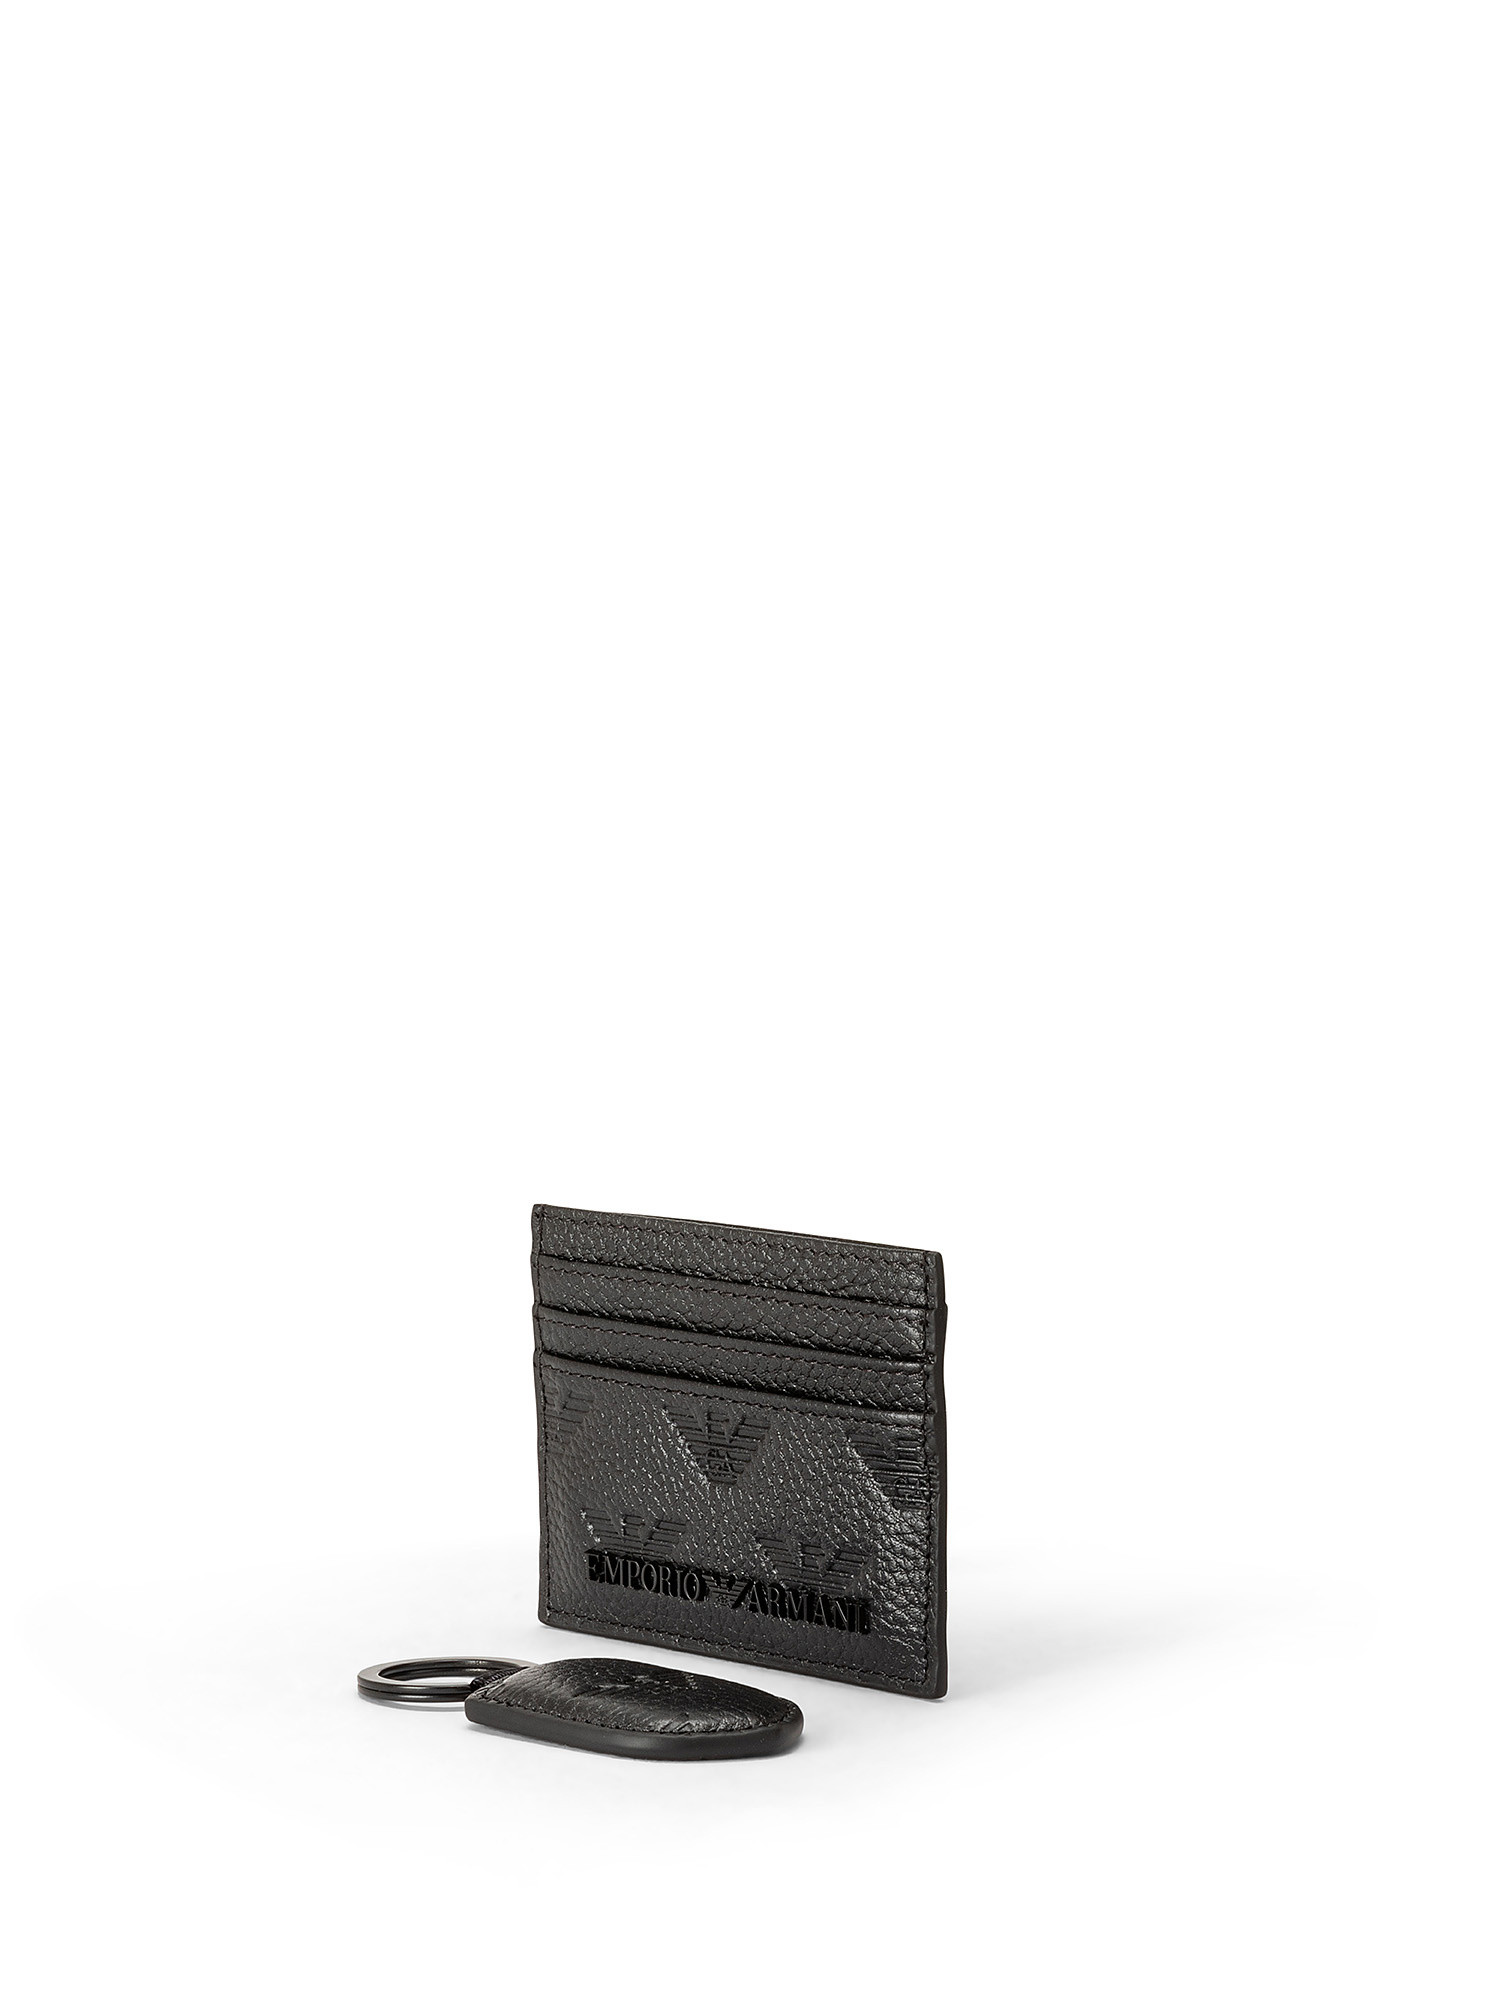 Emporio Armani - Leather card holder with all-over Eagle logo, Black, large image number 1